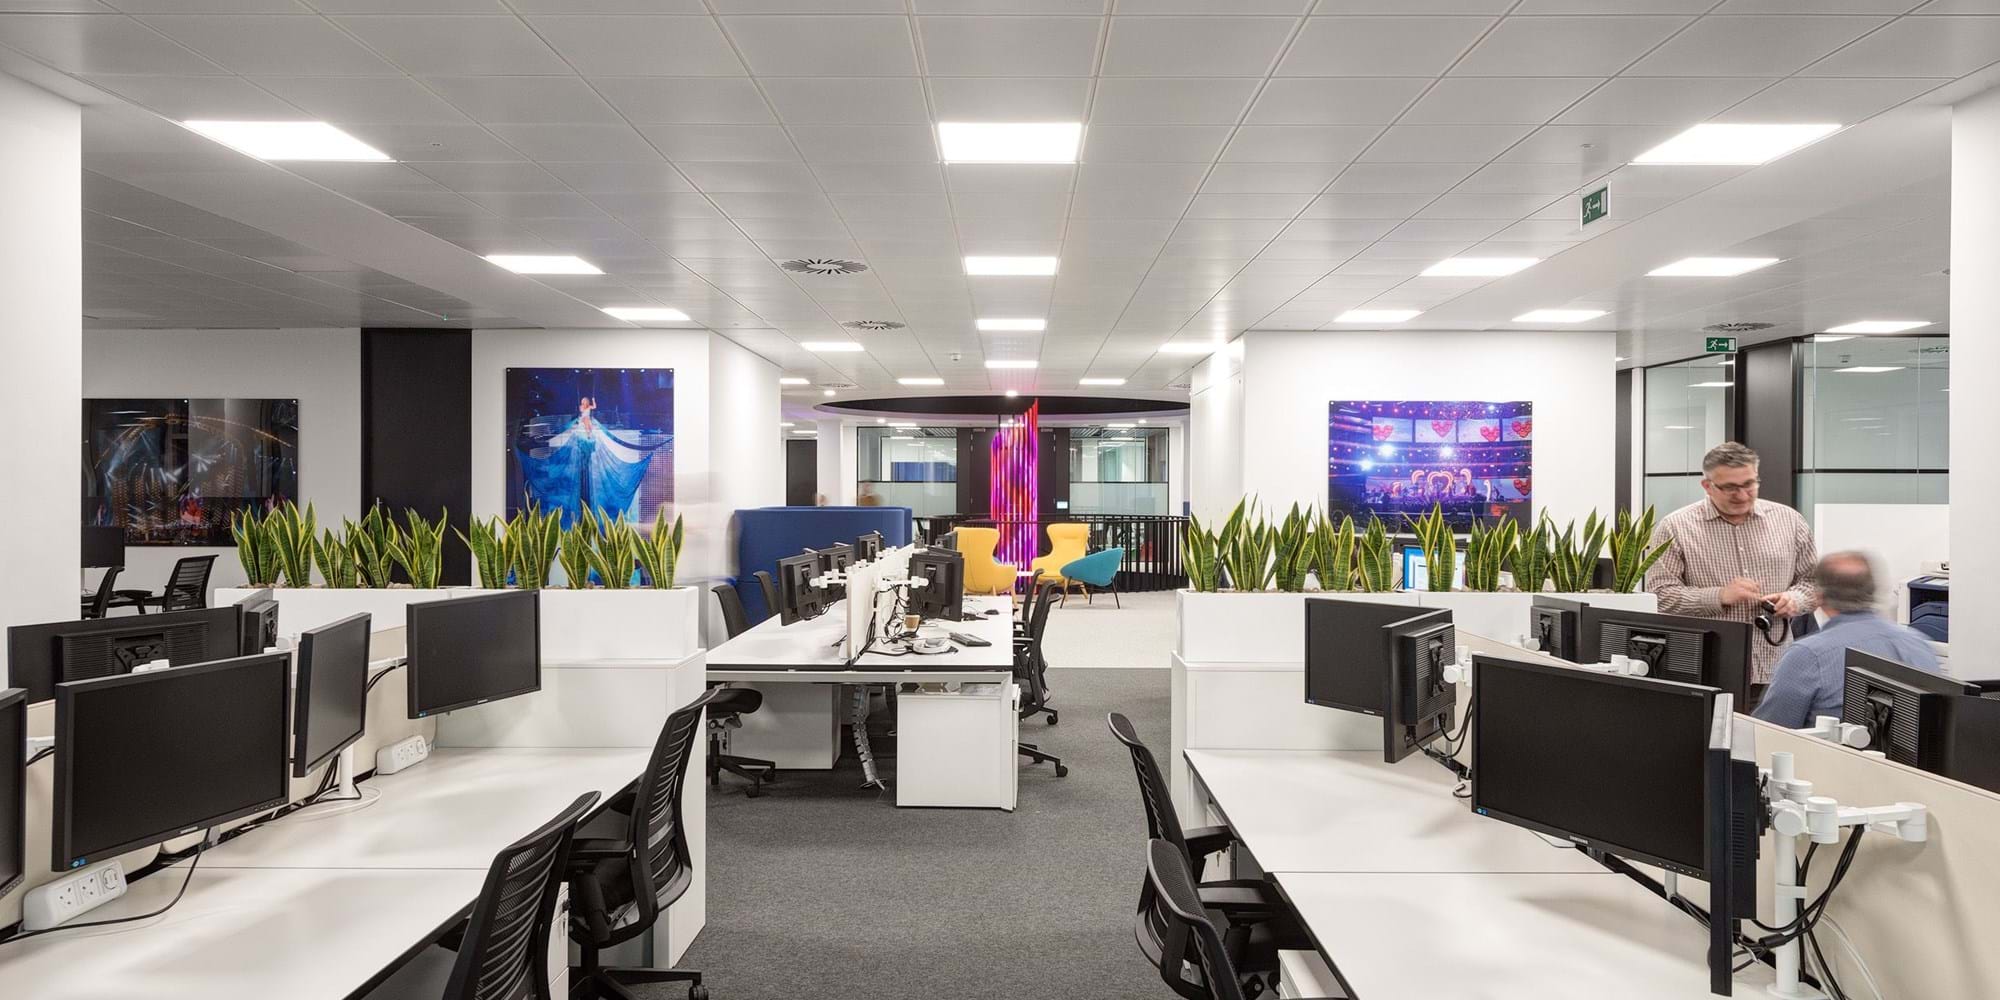 Modus Workspace office design, fit out and refurbishment - Harman - Harman 11 amended highres sRGB.jpg